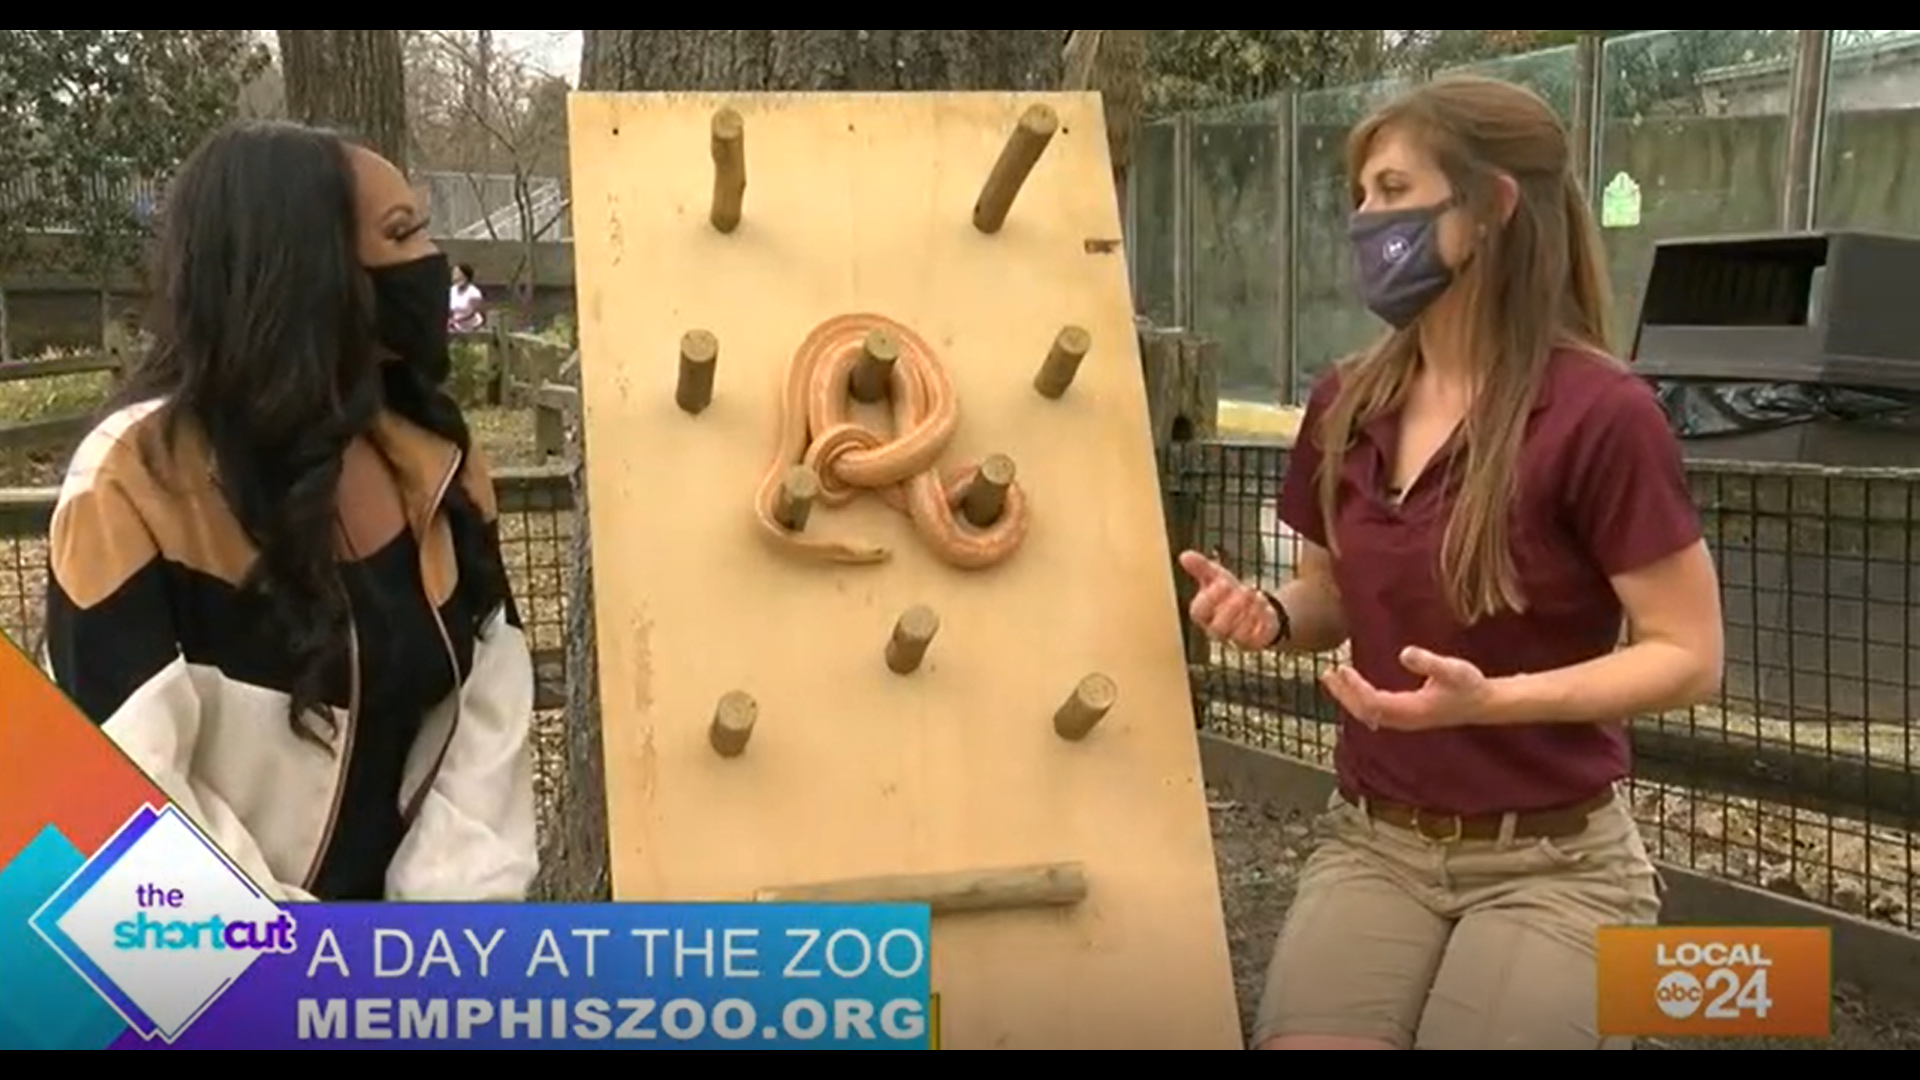 Calling all future Zoologists! If you're looking to gain some real life experience in a safe environment, check out what the Memphis Zoo has to offer. :)